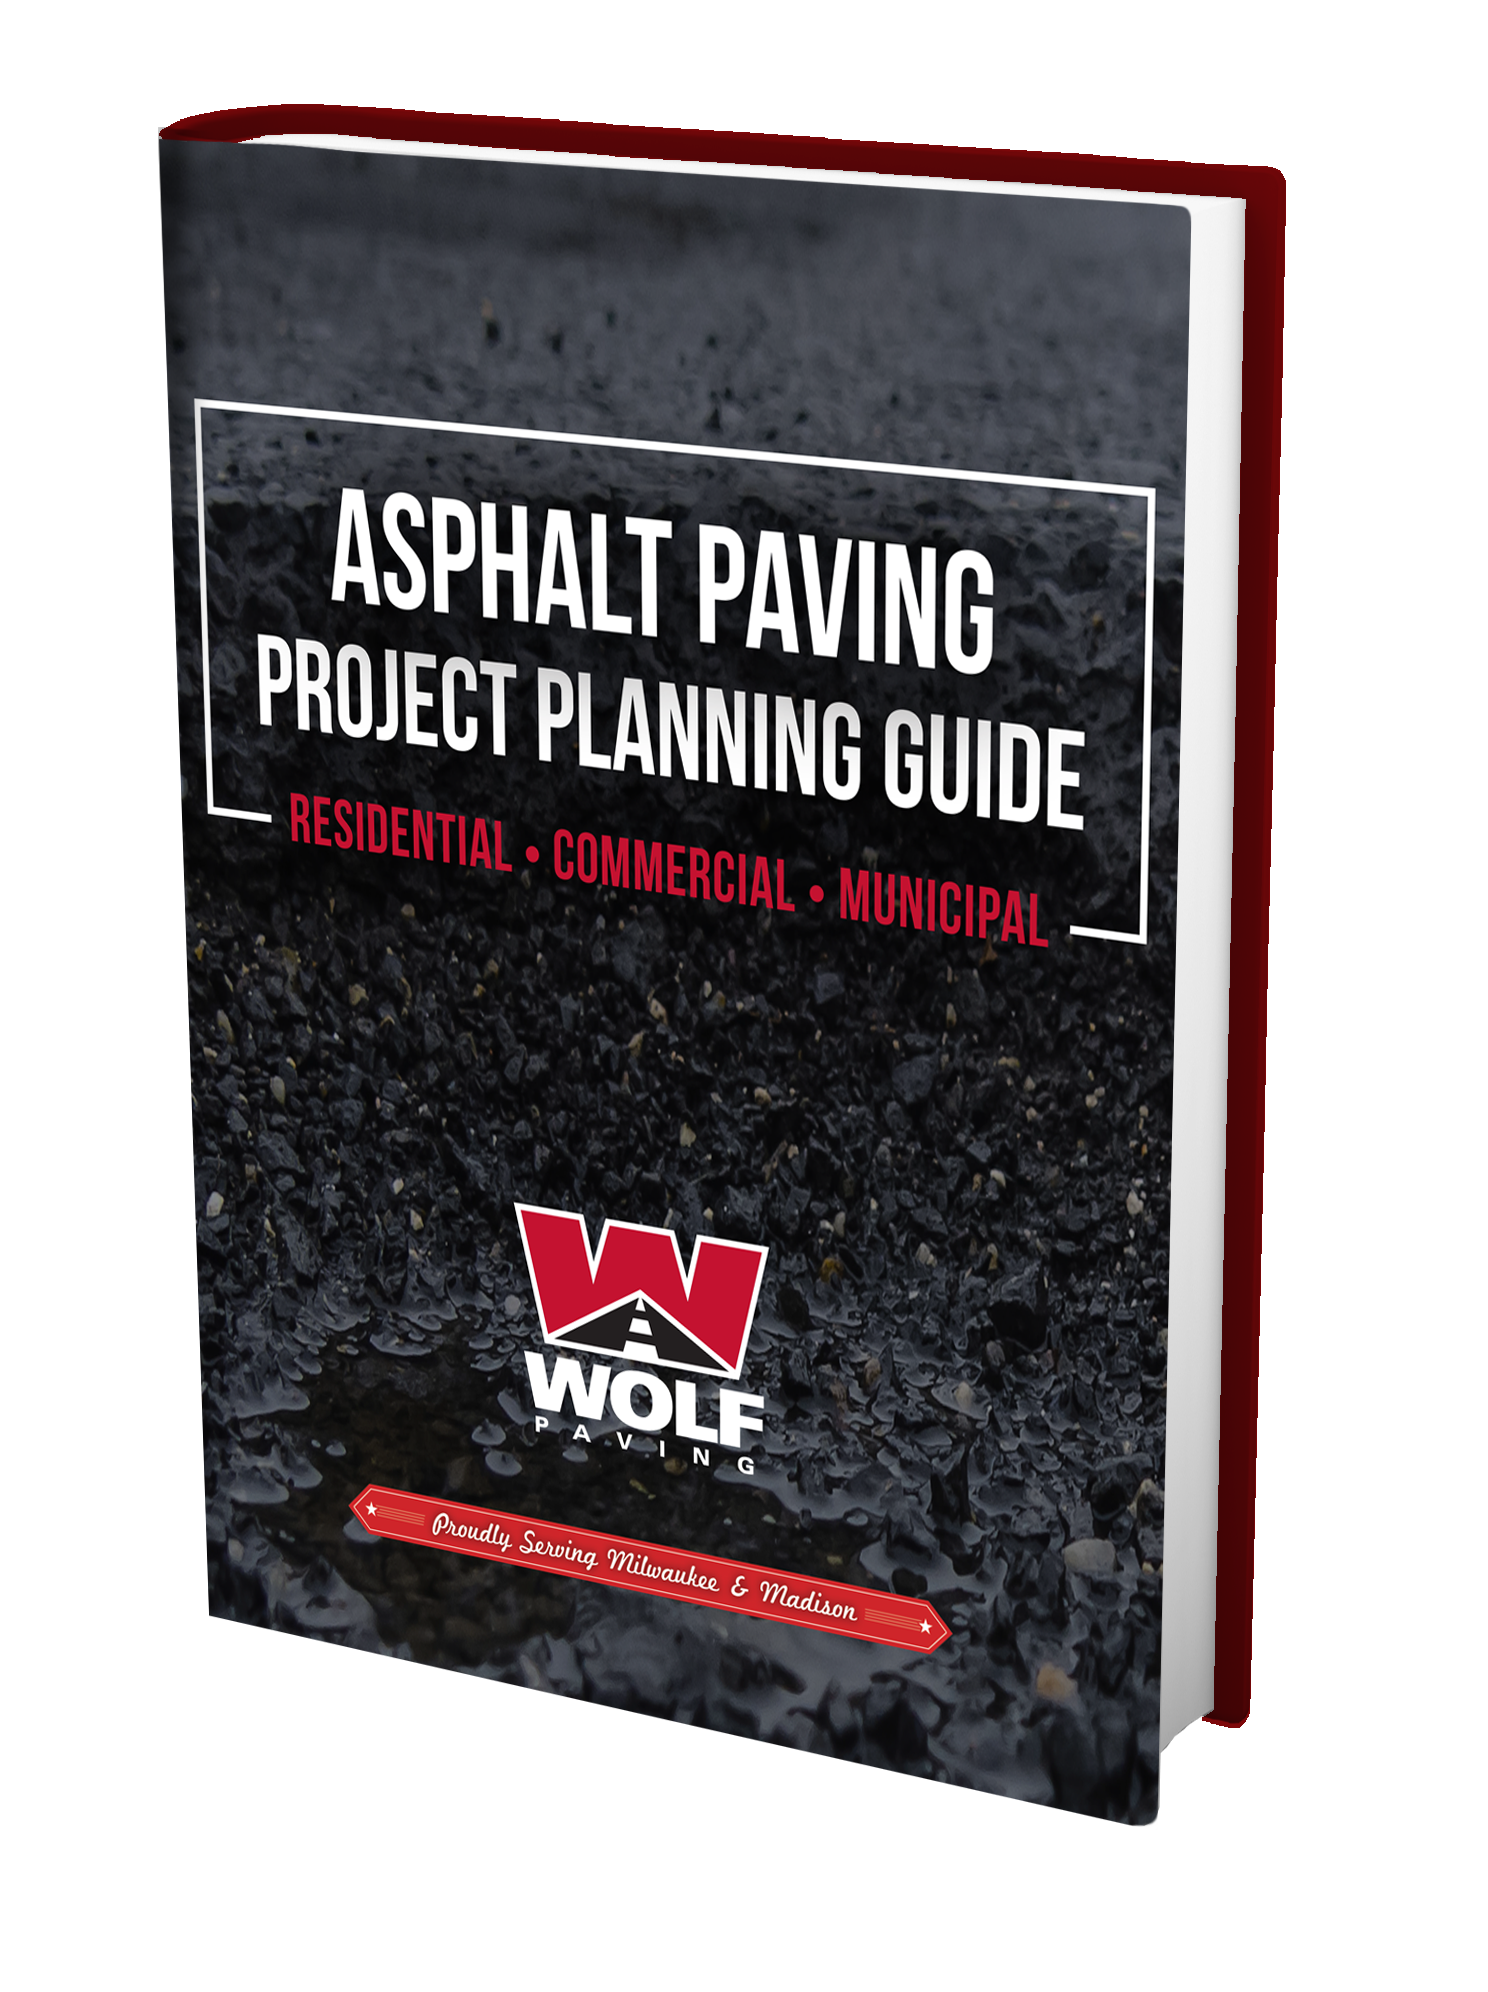 Paving 101: What You Should Know About Asphalt Paving - Perrin Construction